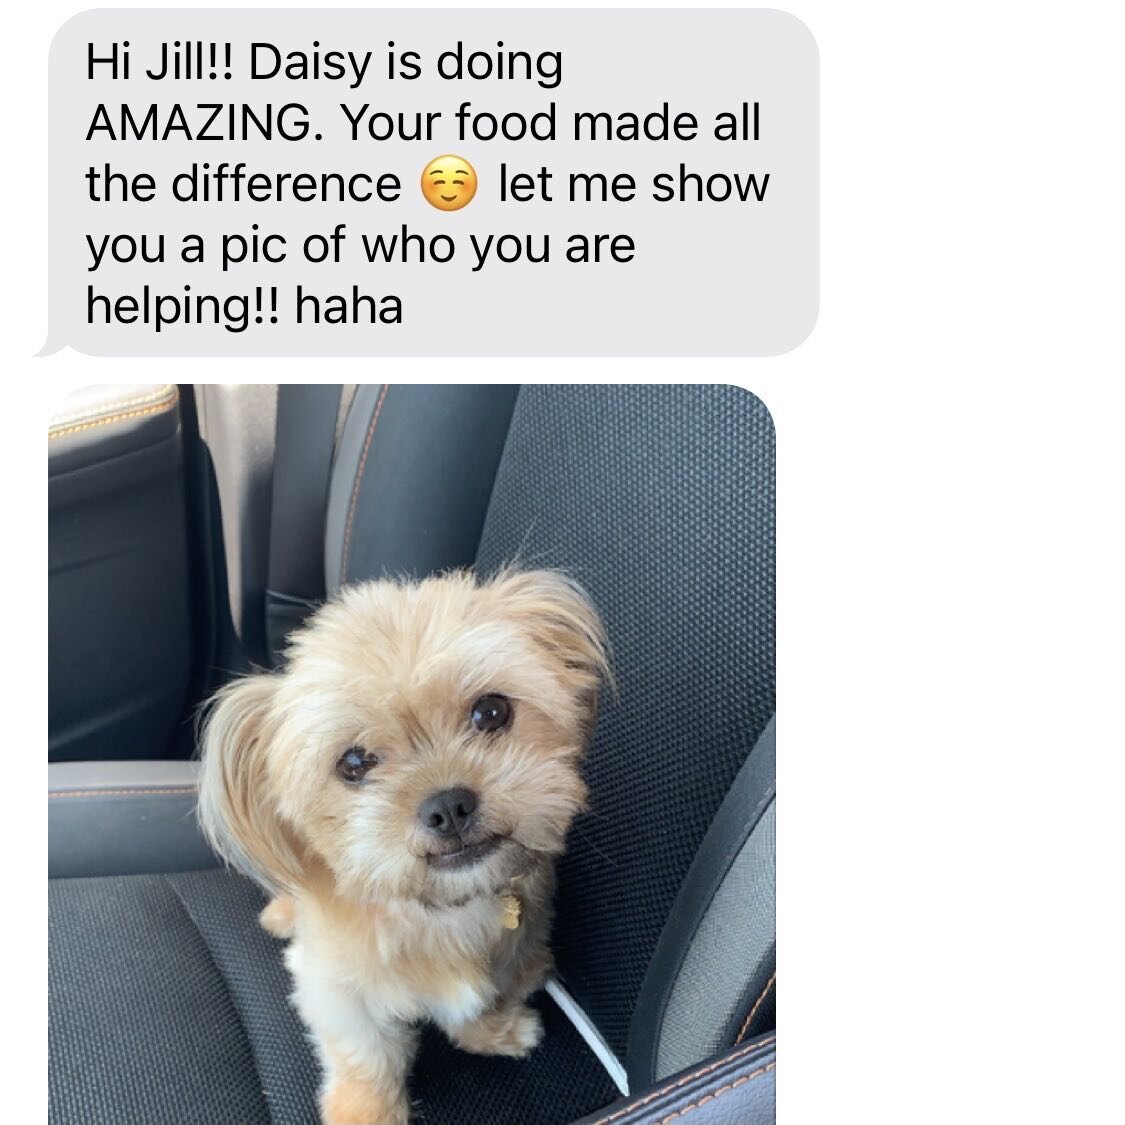 Daisy.

This sweet little thing had a bout of awful runs. A week on the K9 Cleanse and her sensitive tummy is back to healthy and happy. Belly rubs and love miss Daisy. 💛✨🐕

#upwarddoggy
#goodfeeddaily
#k9cleanse
#adoptdontshop
#locallove